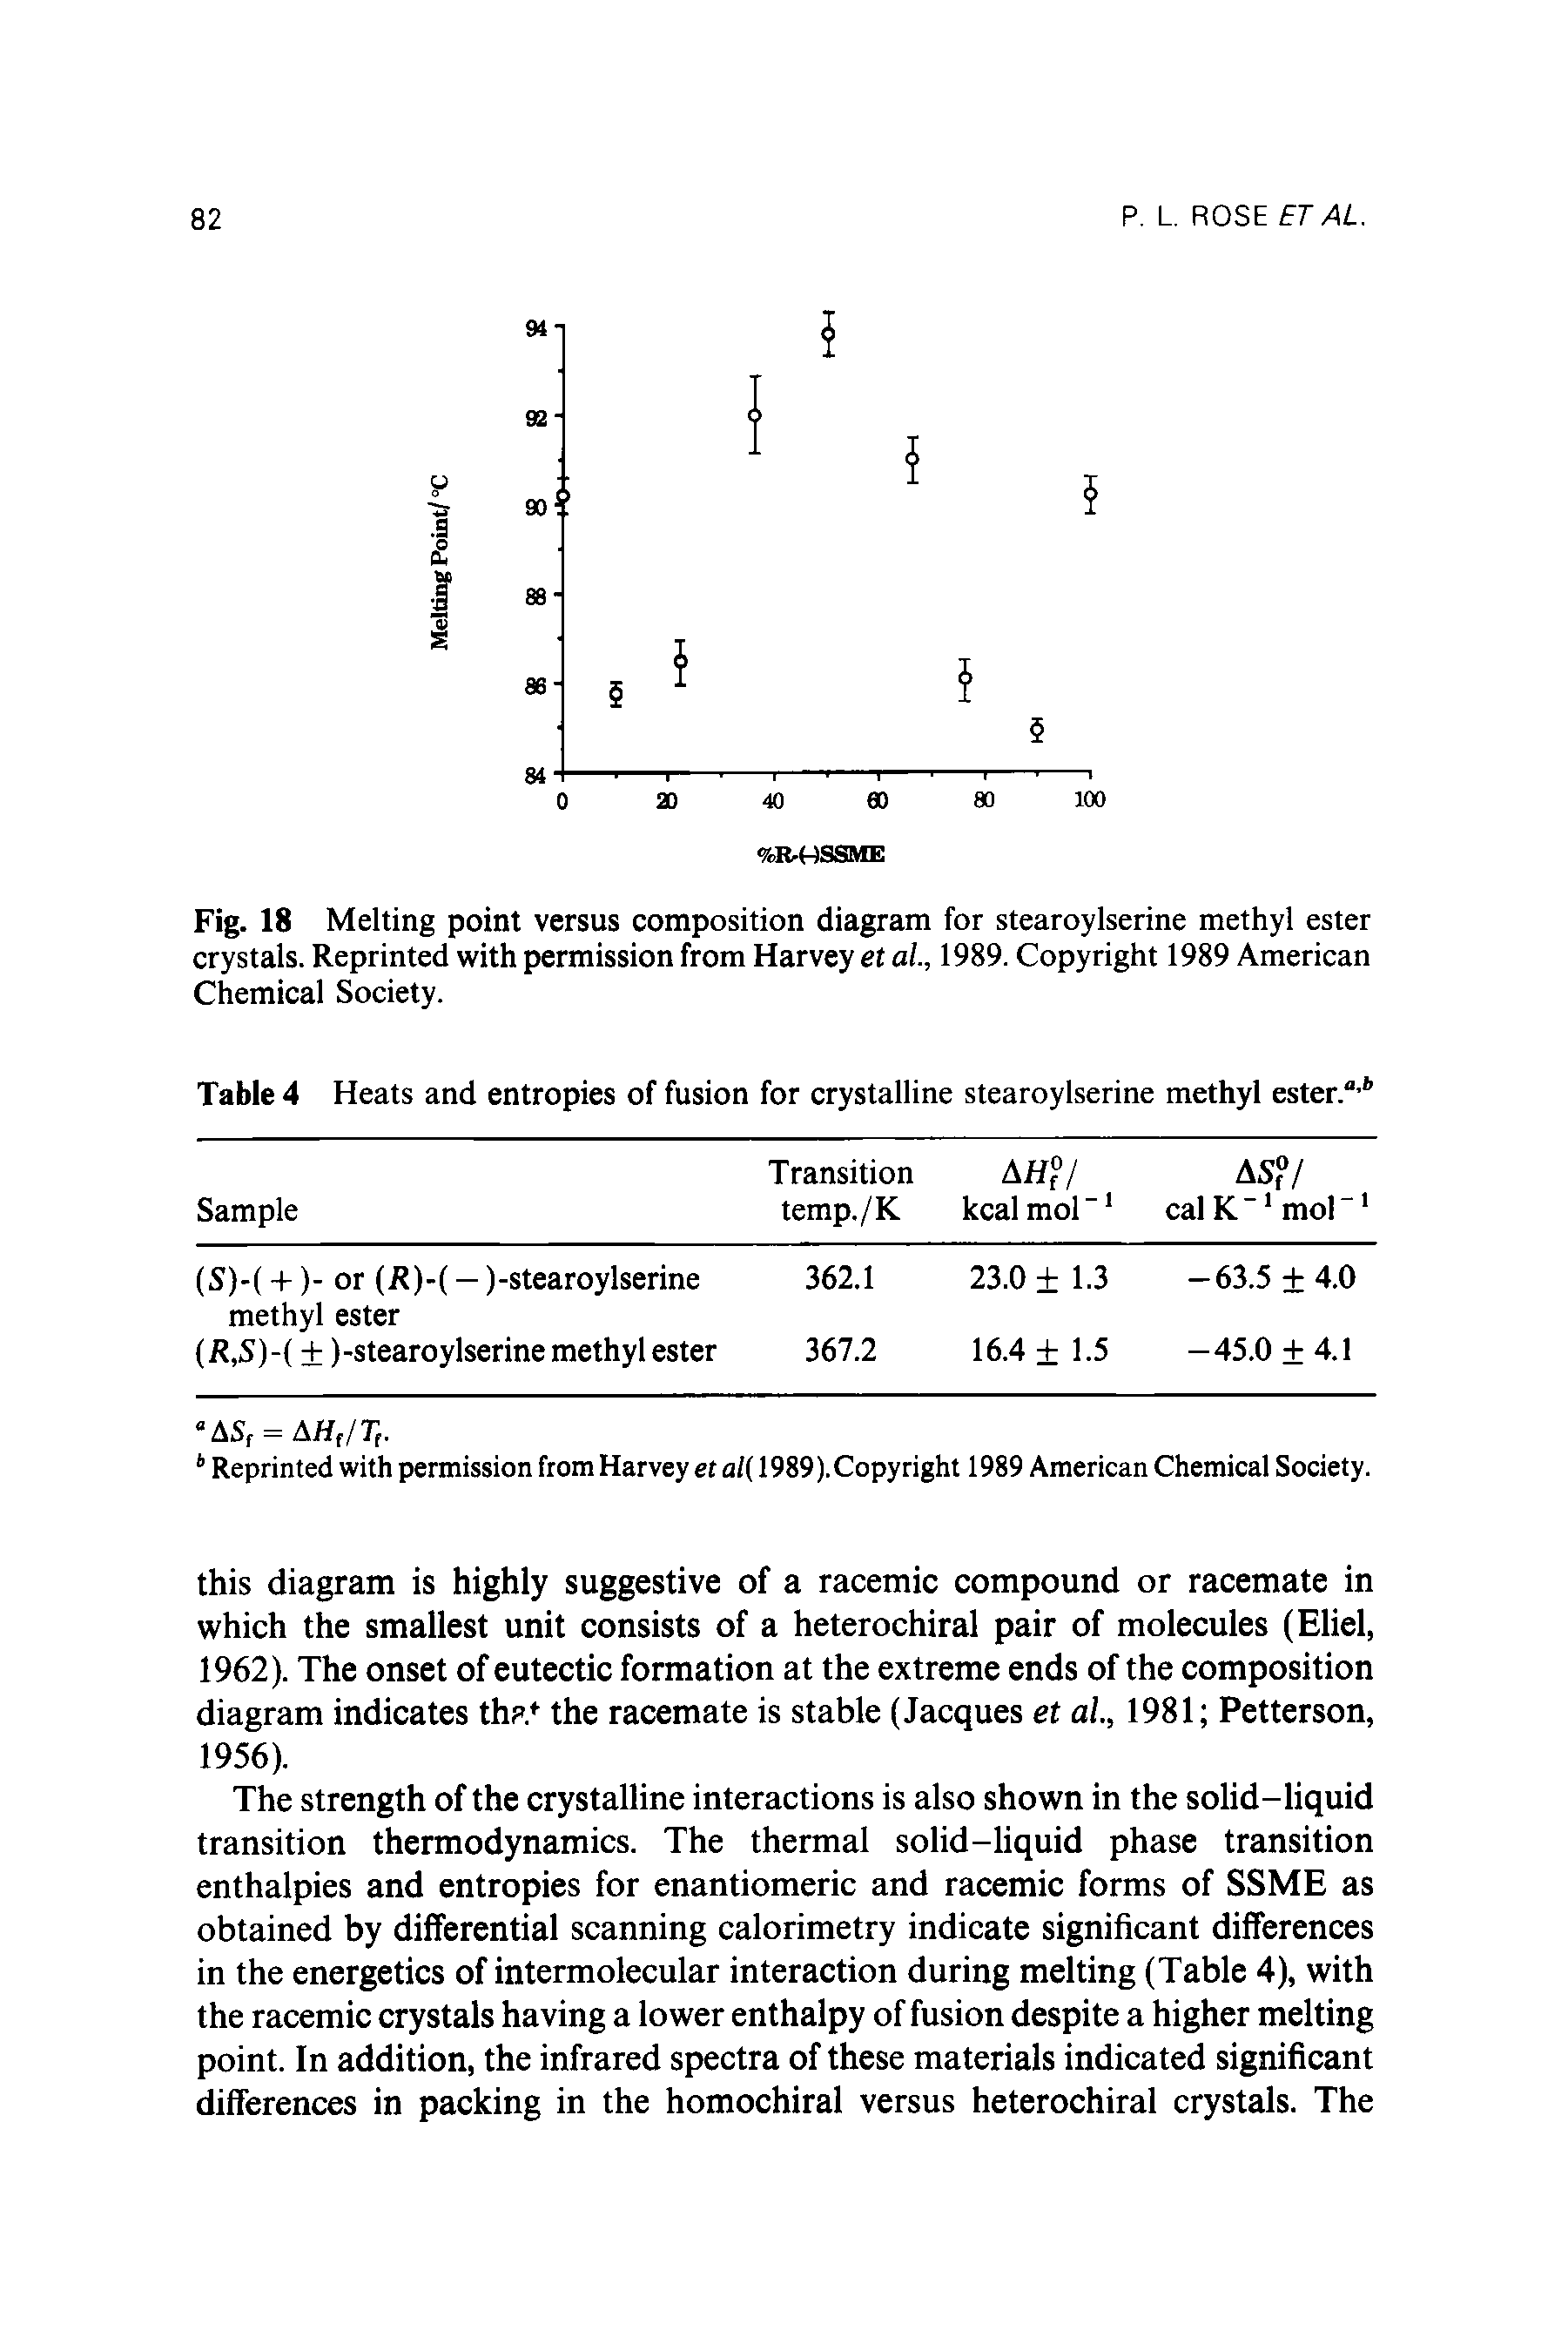 Fig. 18 Melting point versus composition diagram for stearoylserine methyl ester crystals. Reprinted with permission from Harvey et al., 1989. Copyright 1989 American Chemical Society.